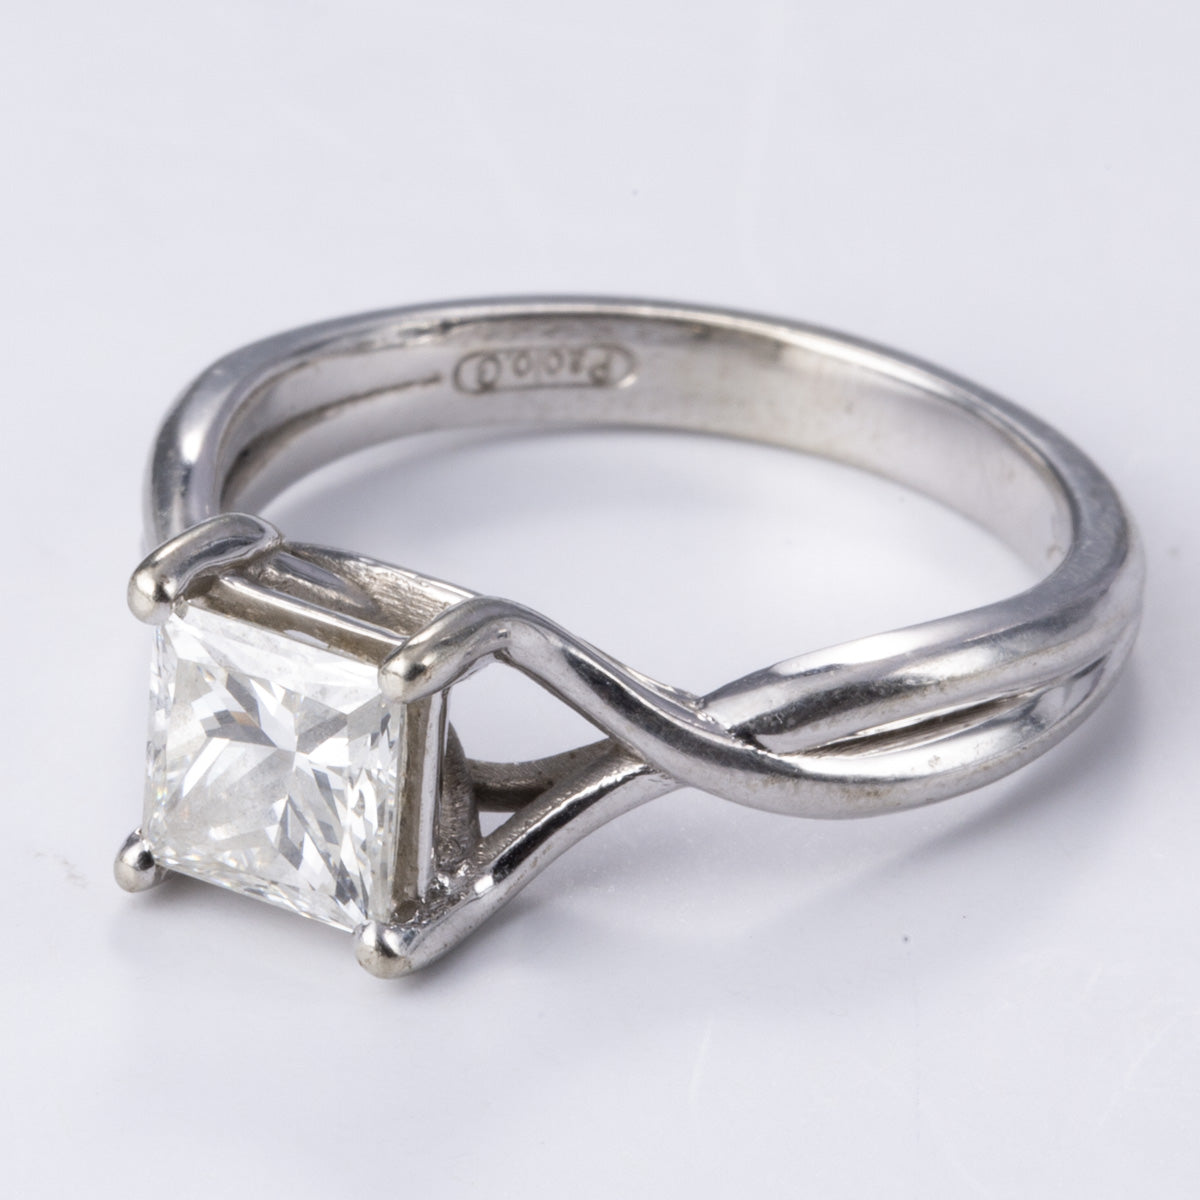 Paolo G' Diamond Engagement Ring | 1.59ct | SZ 8.75 |